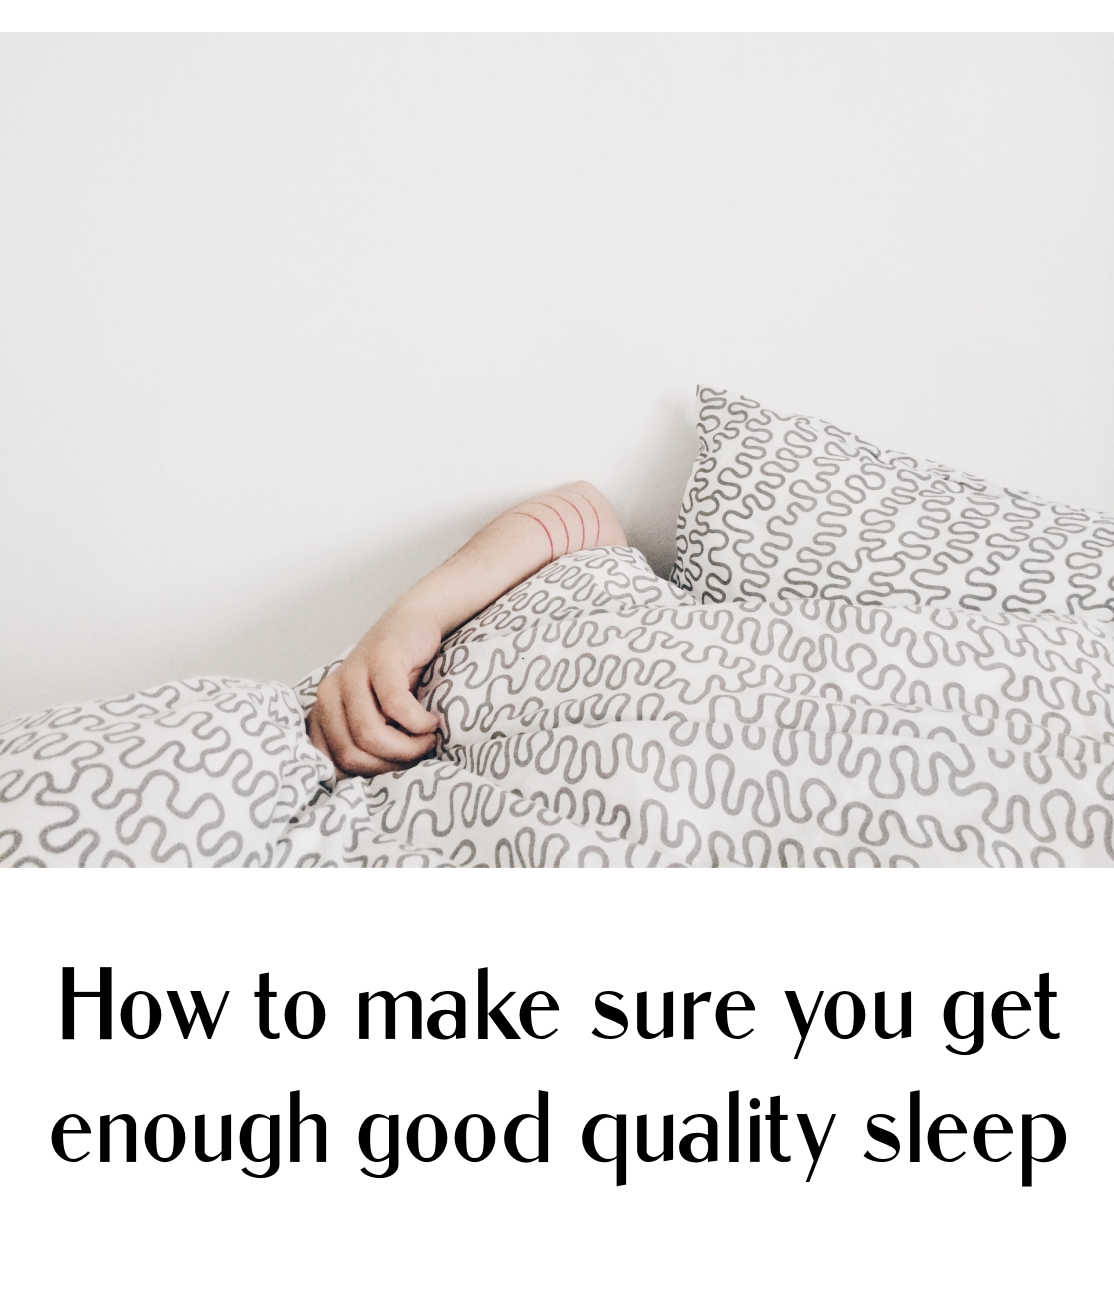 How to get enough good quality sleep